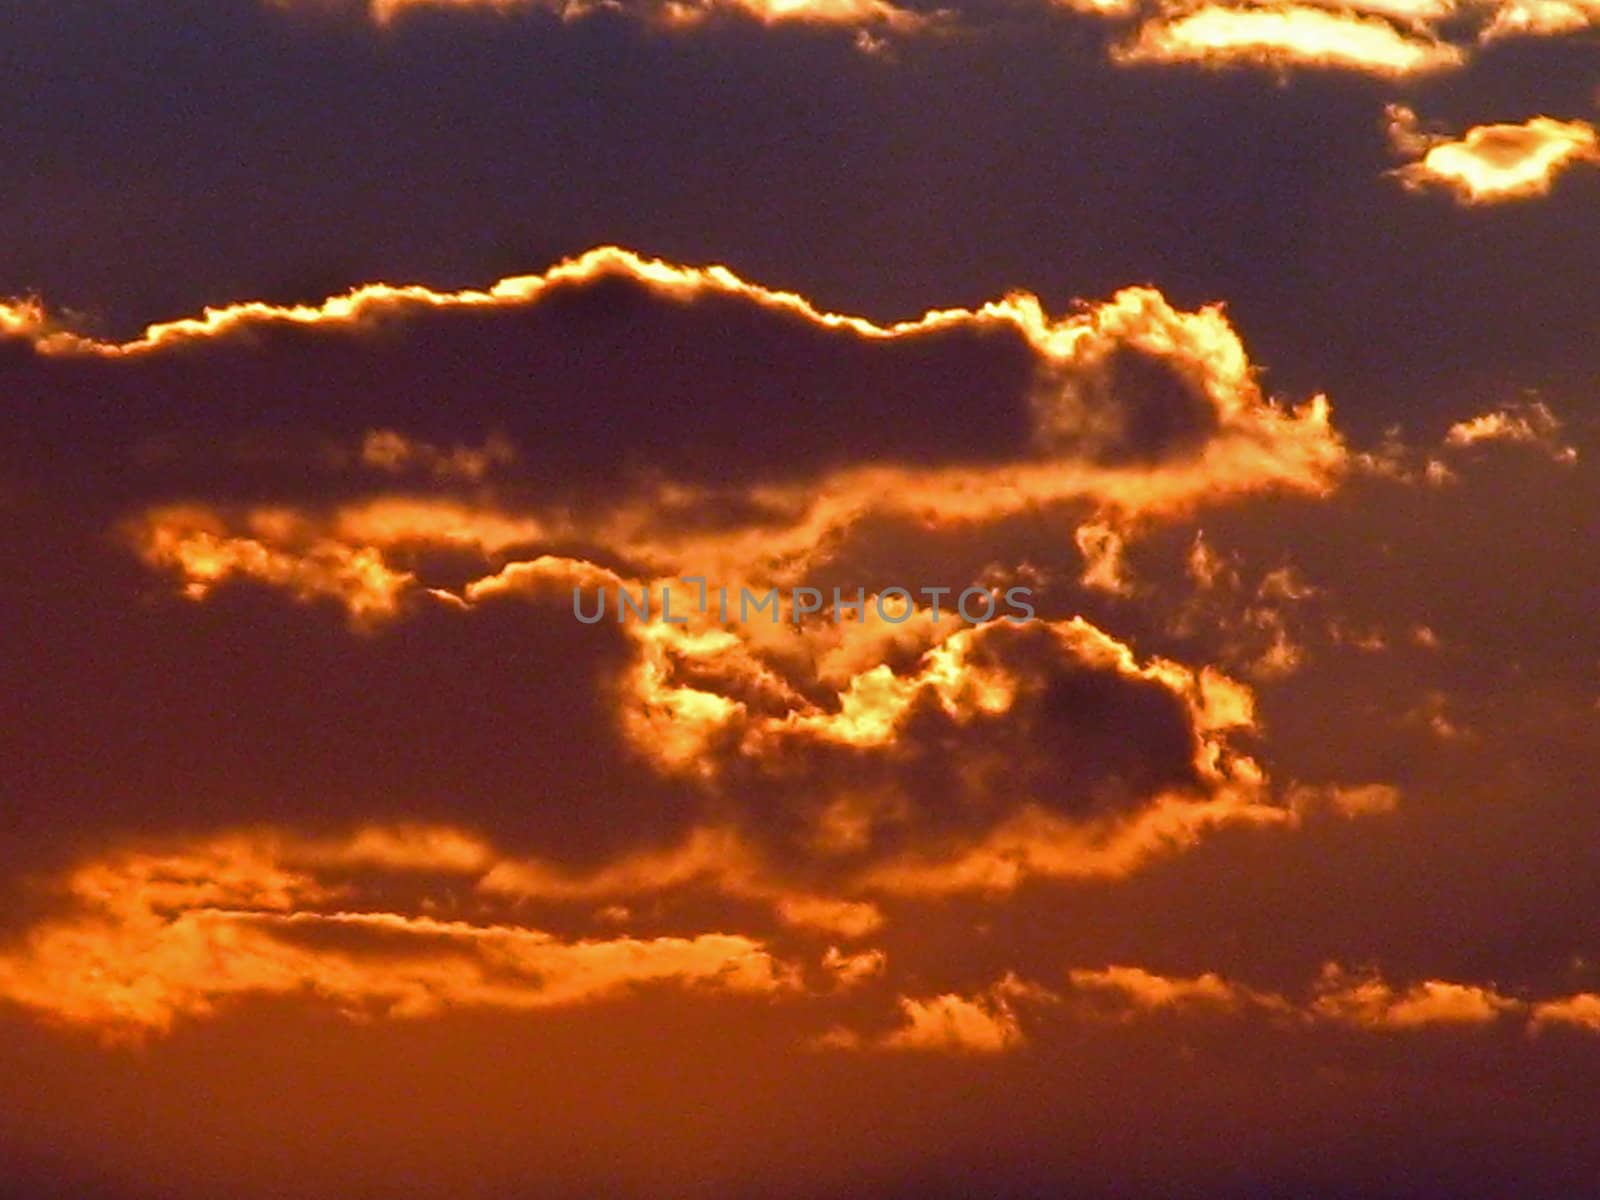 A red and golden burning sunset with clouds.